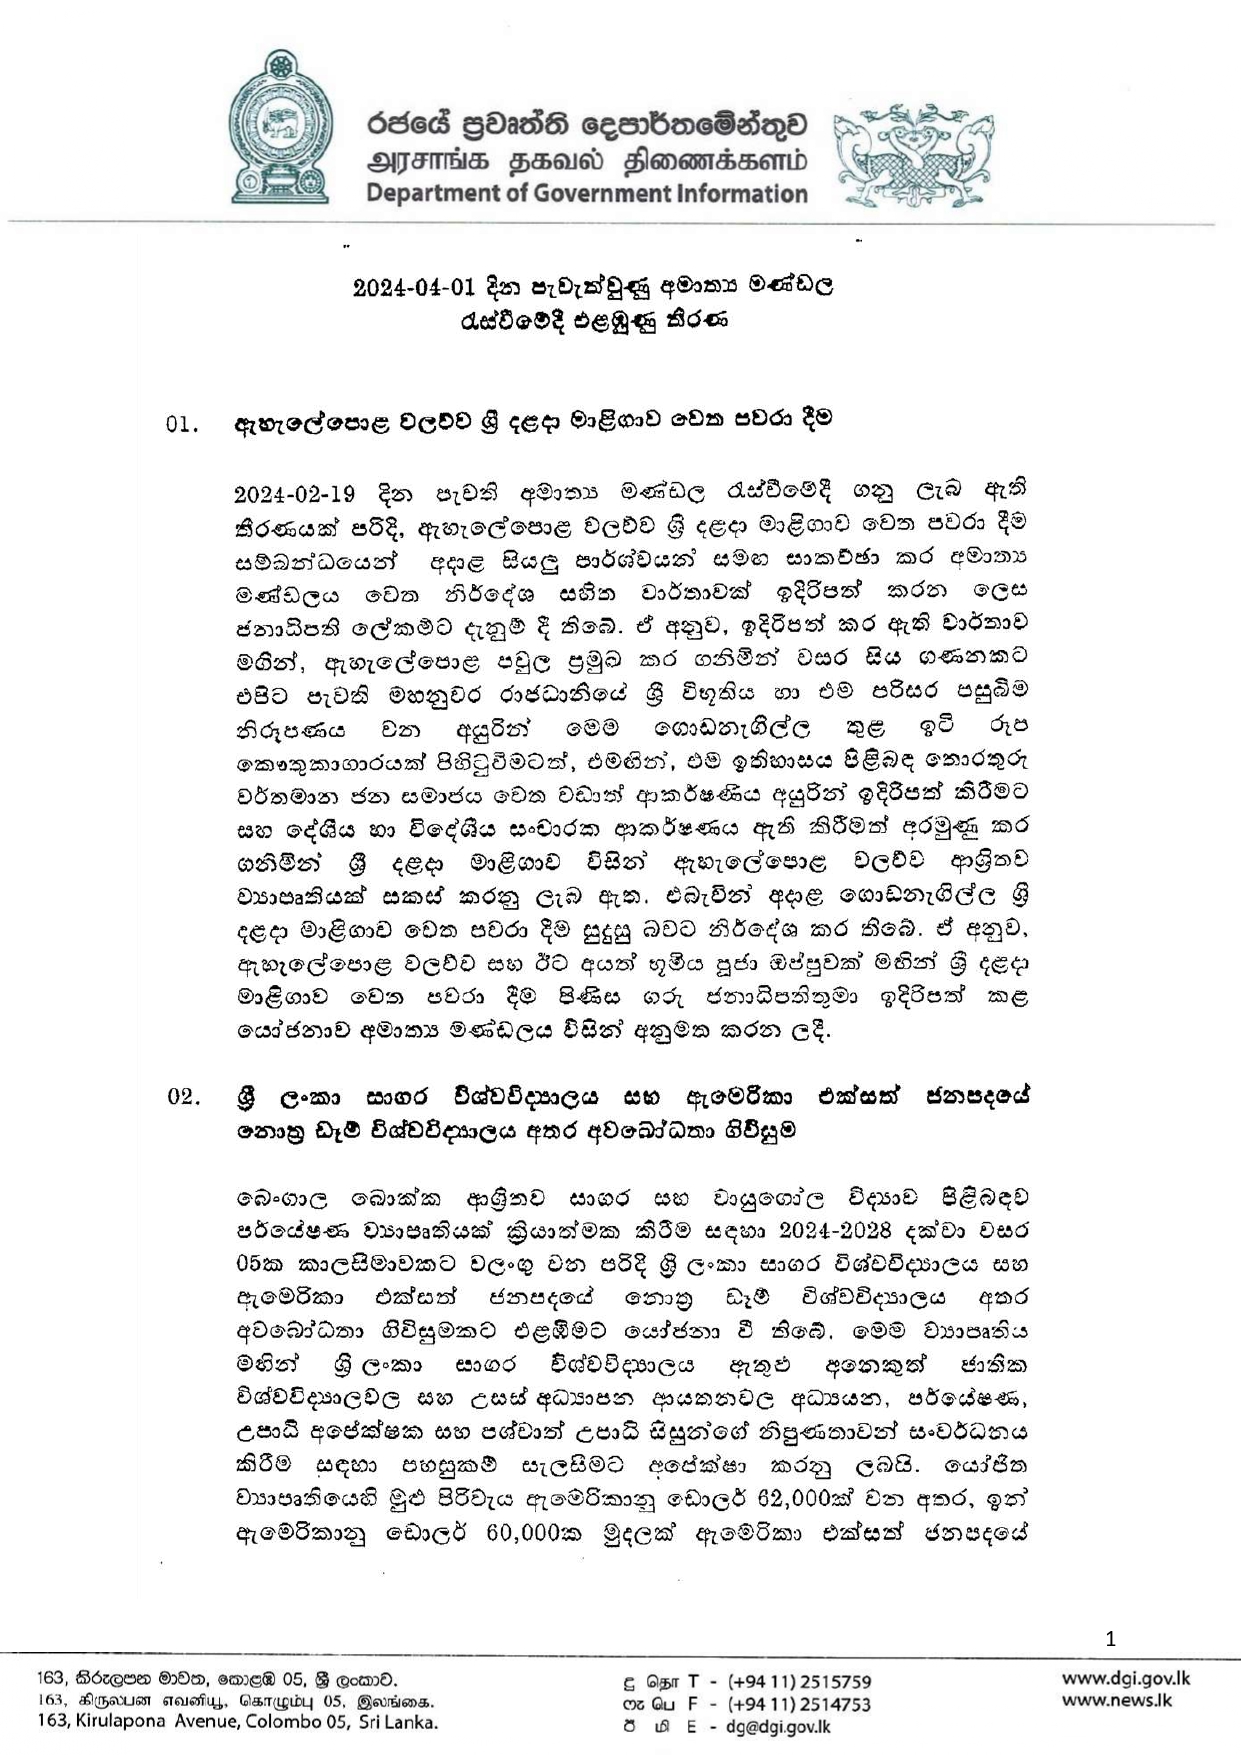 Cabinet Decisions on 01.04.2024 compressed page 0001